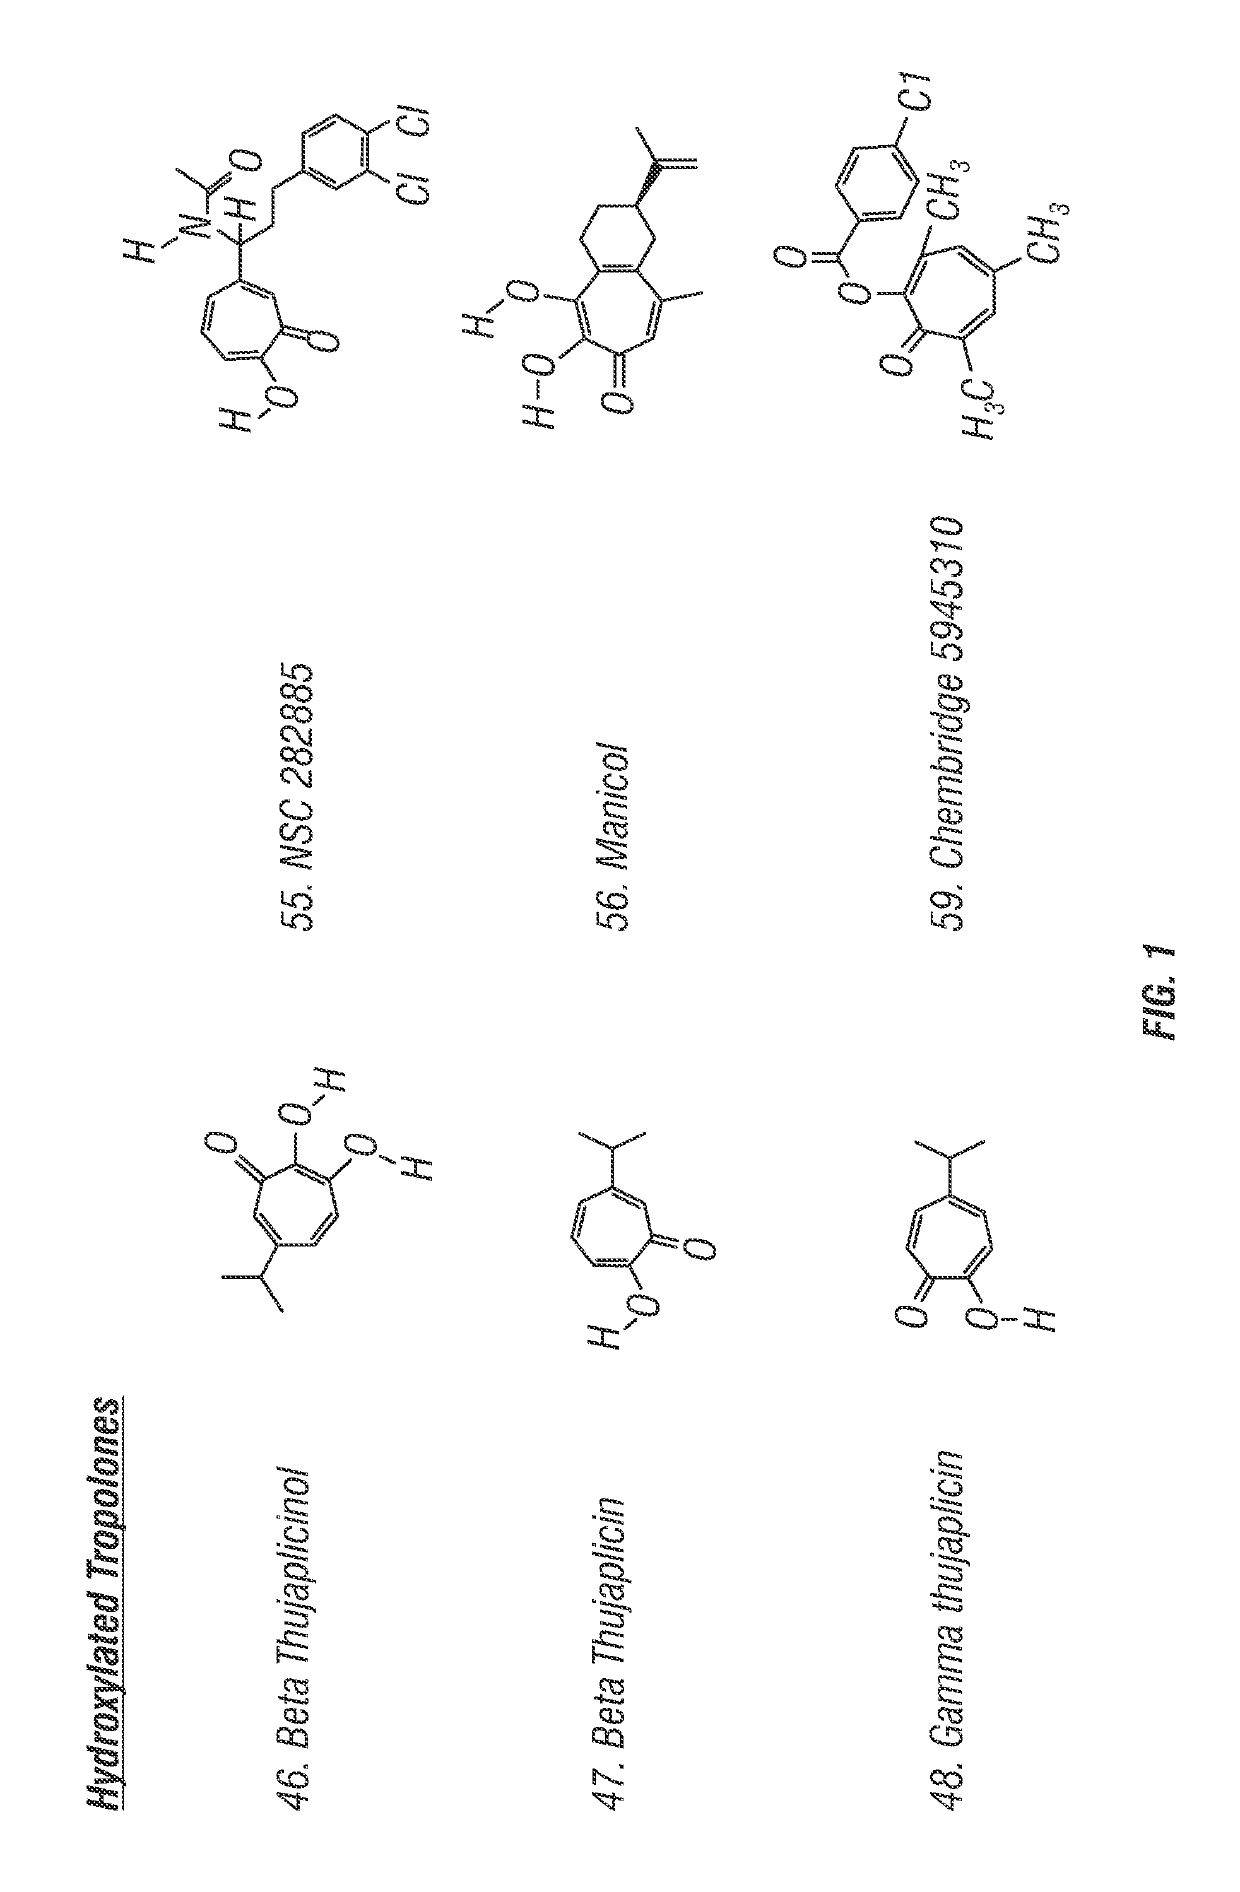 Inhibitors of HSV nucleotidyl transferases and uses therefor